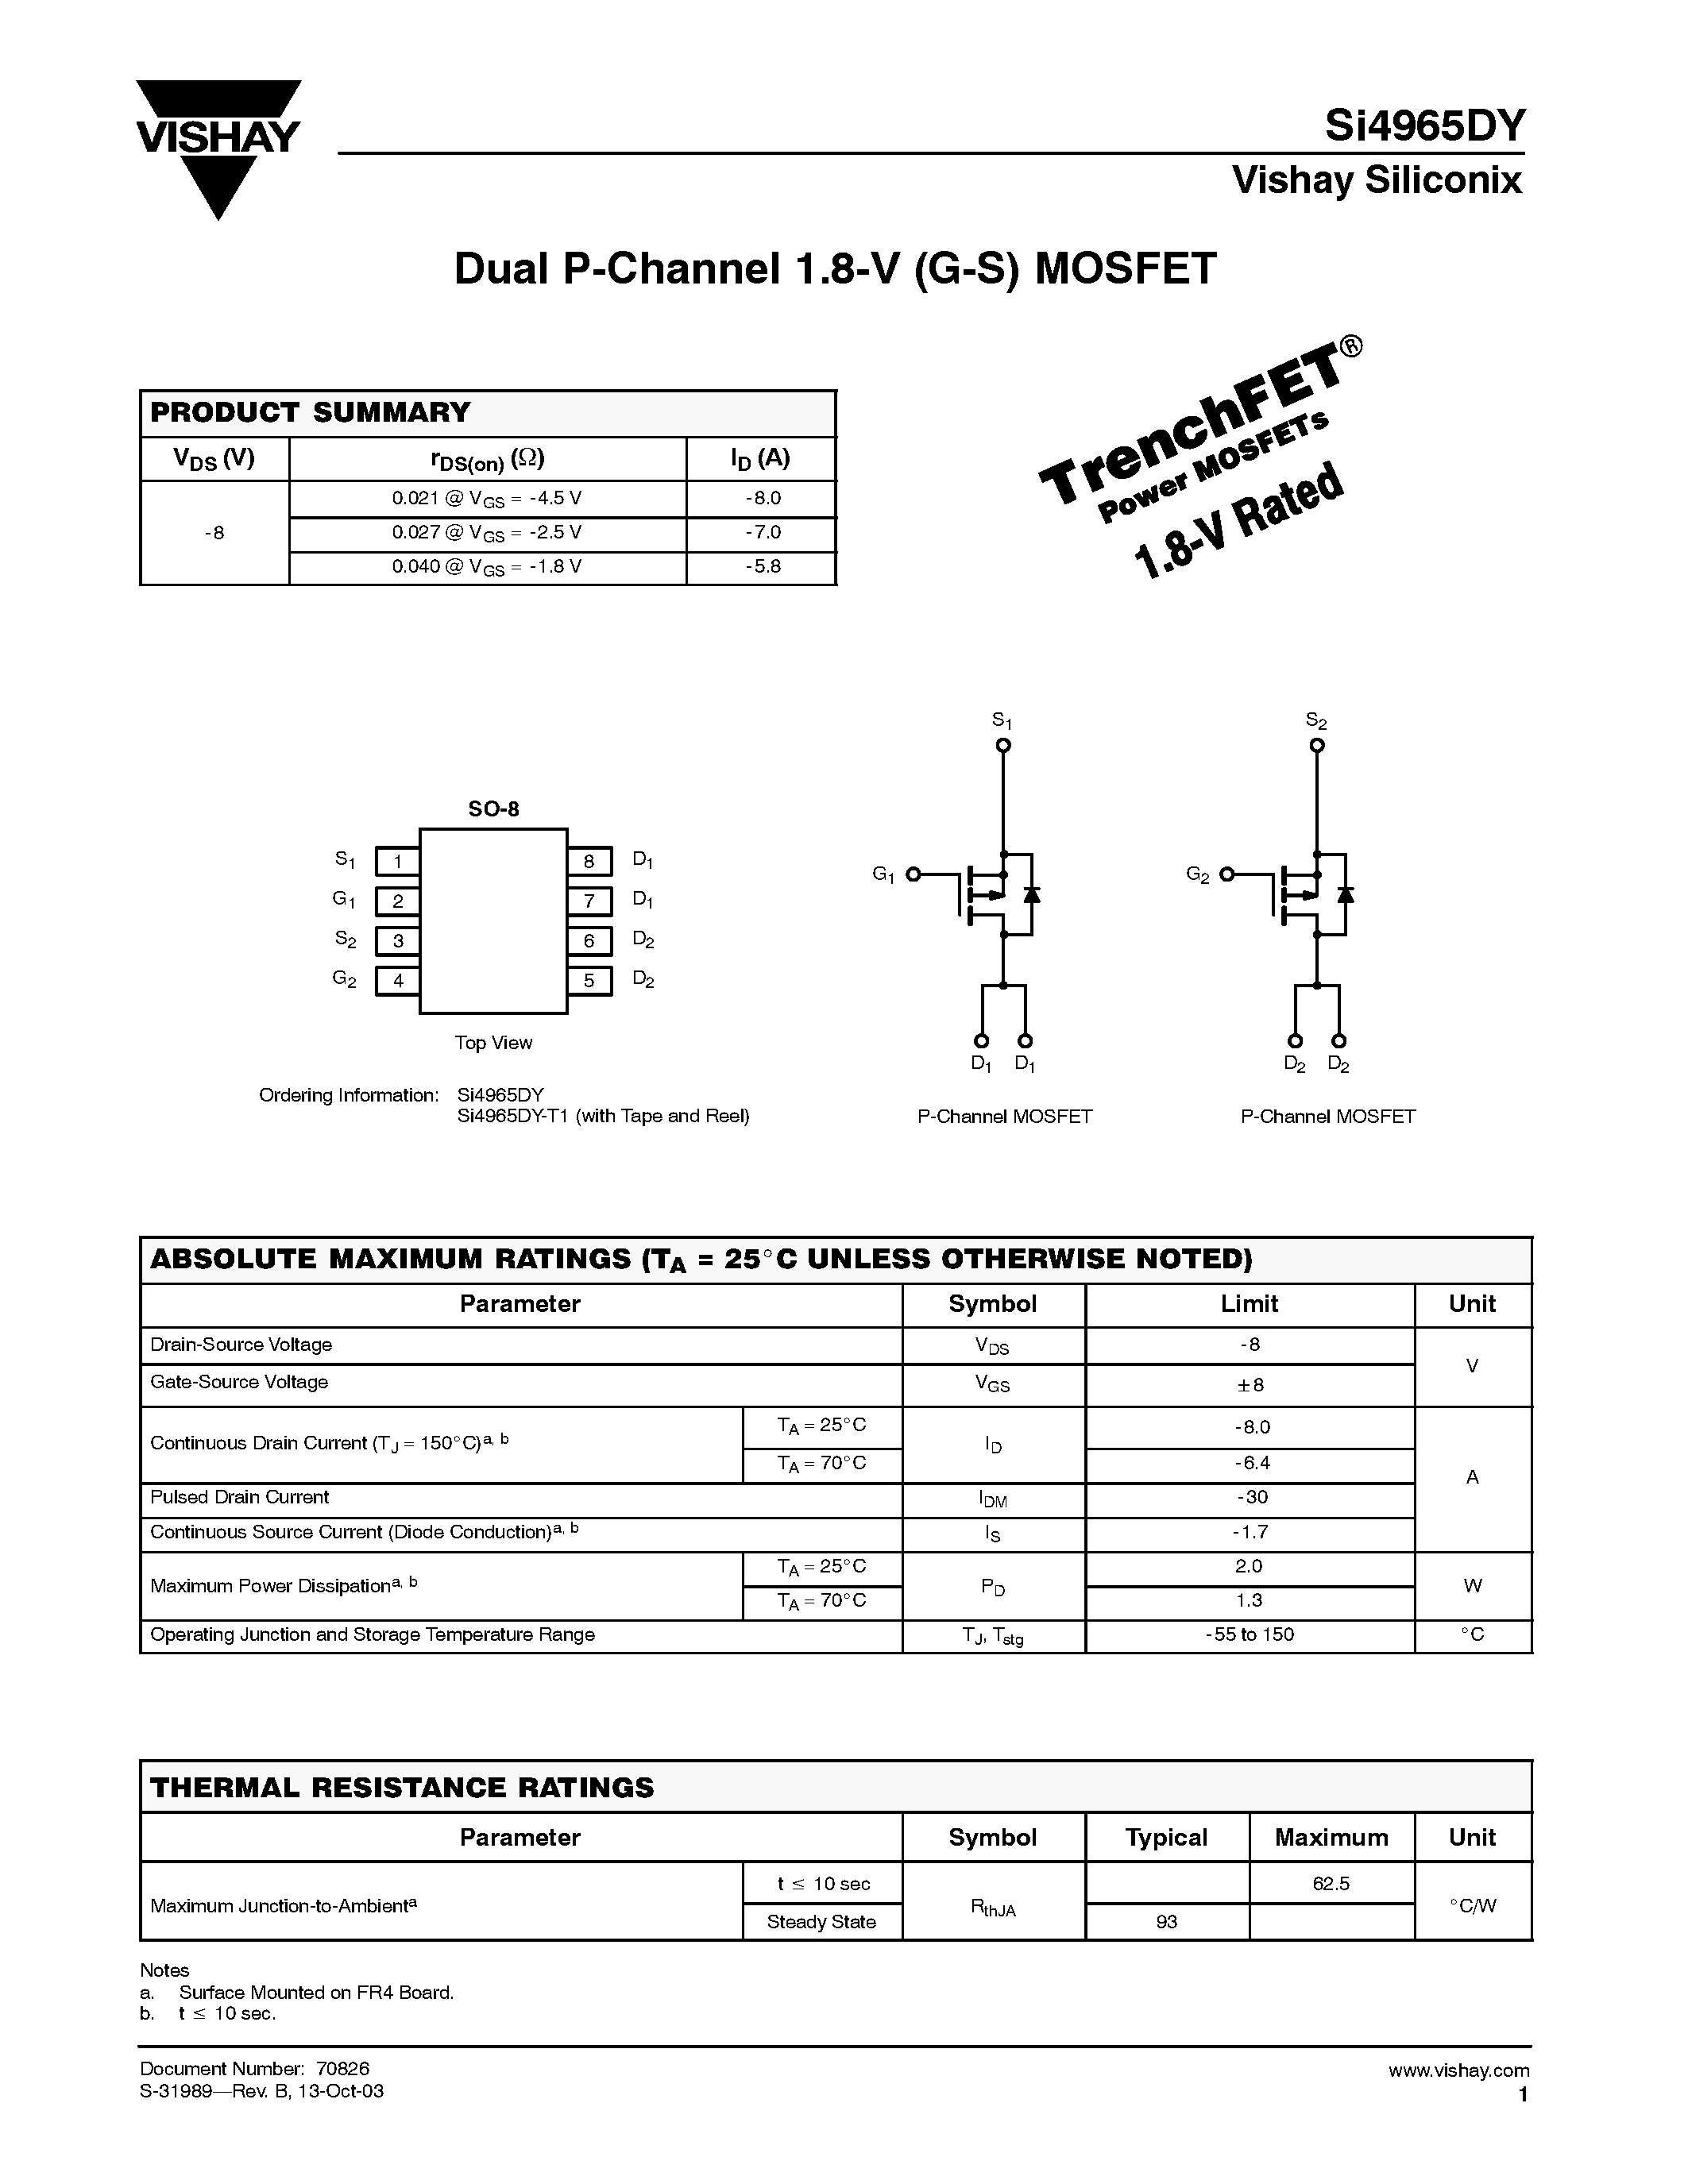 Даташит Si4965DY-T1 - Dual P-Channel 1.8-V (G-S) MOSFET страница 1